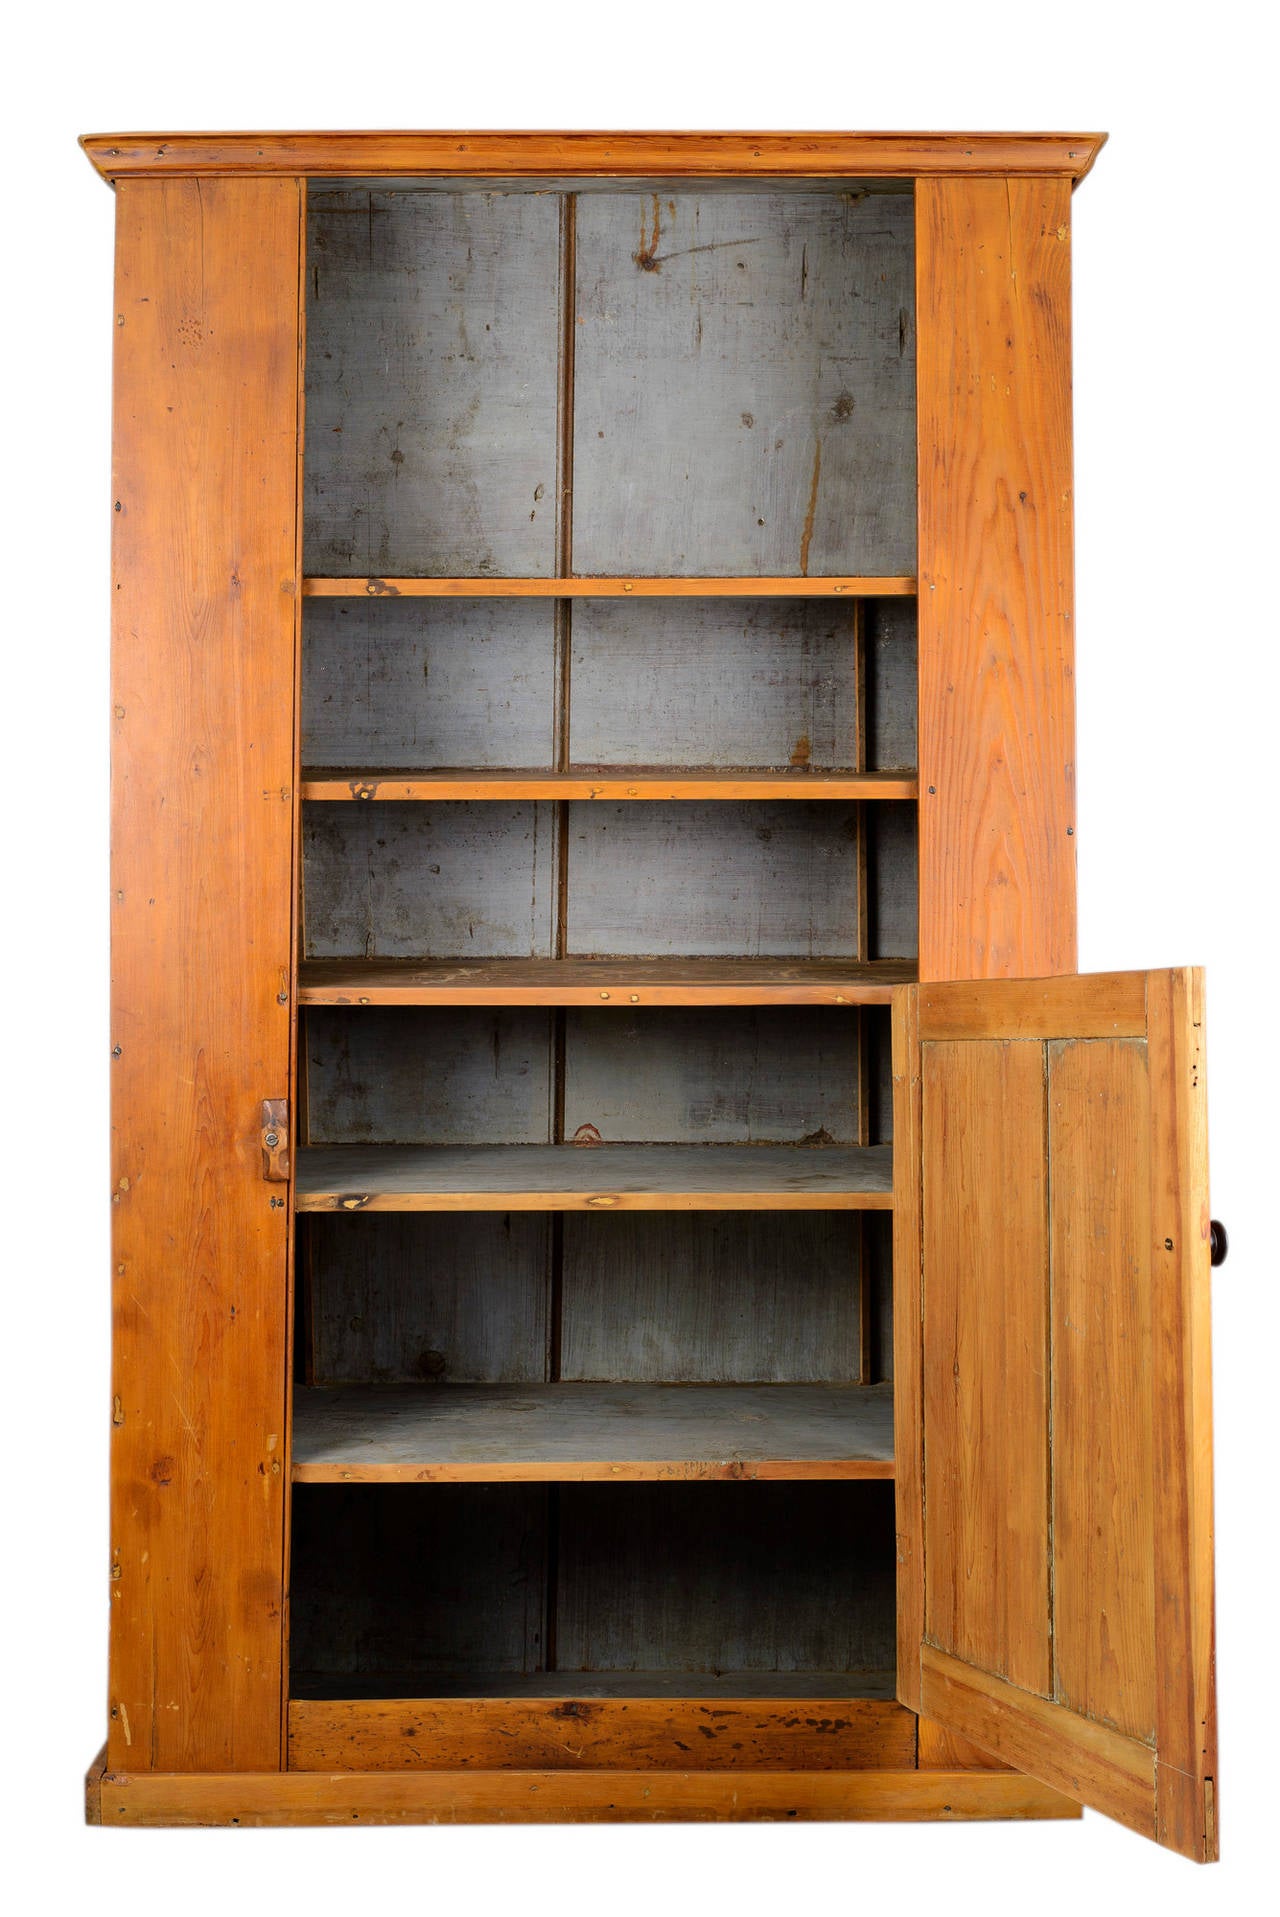 This early cupboard has rustic charm. The paint and hardware are original.
The cupboard sides are made up of one board each. The door has two raised panels and a pair of original H hinges. All moldings are original. The cabinet is of pegged